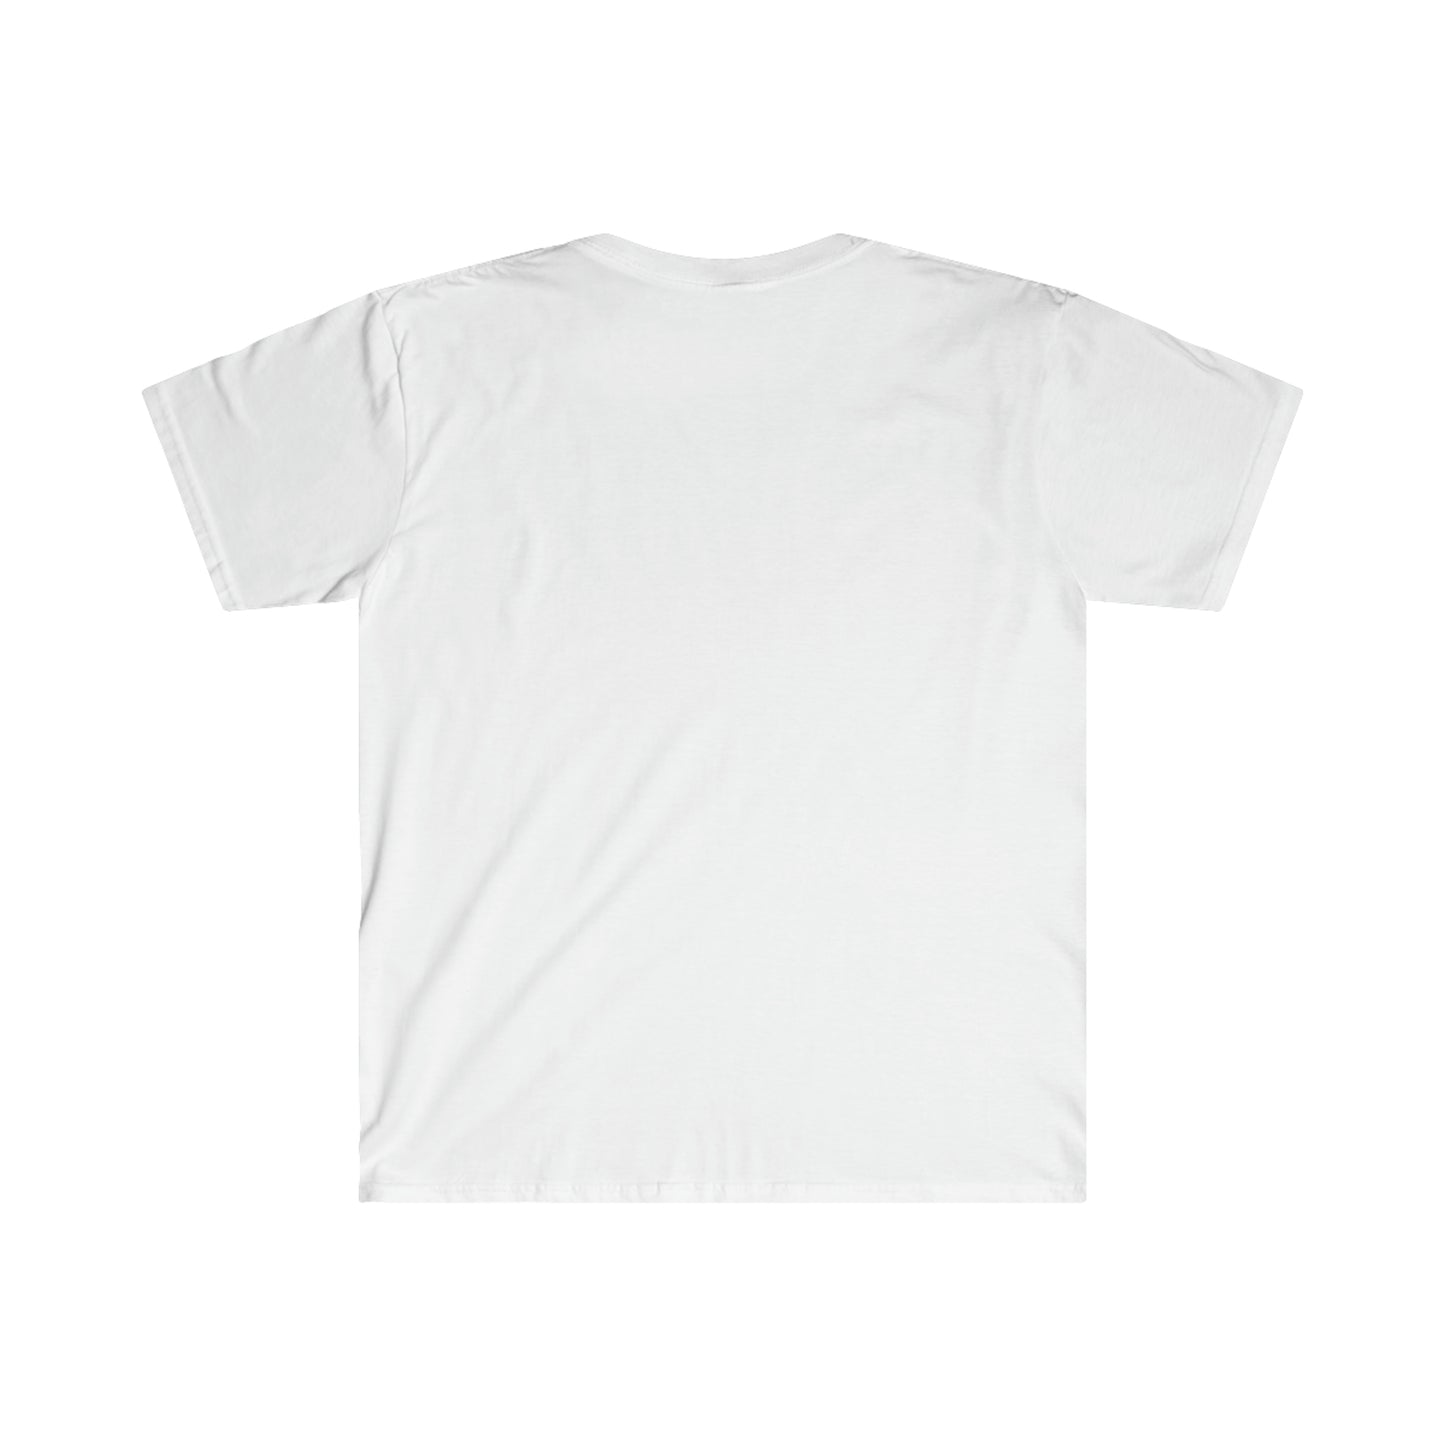 Hearst - Men's Softstyle T-Shirt